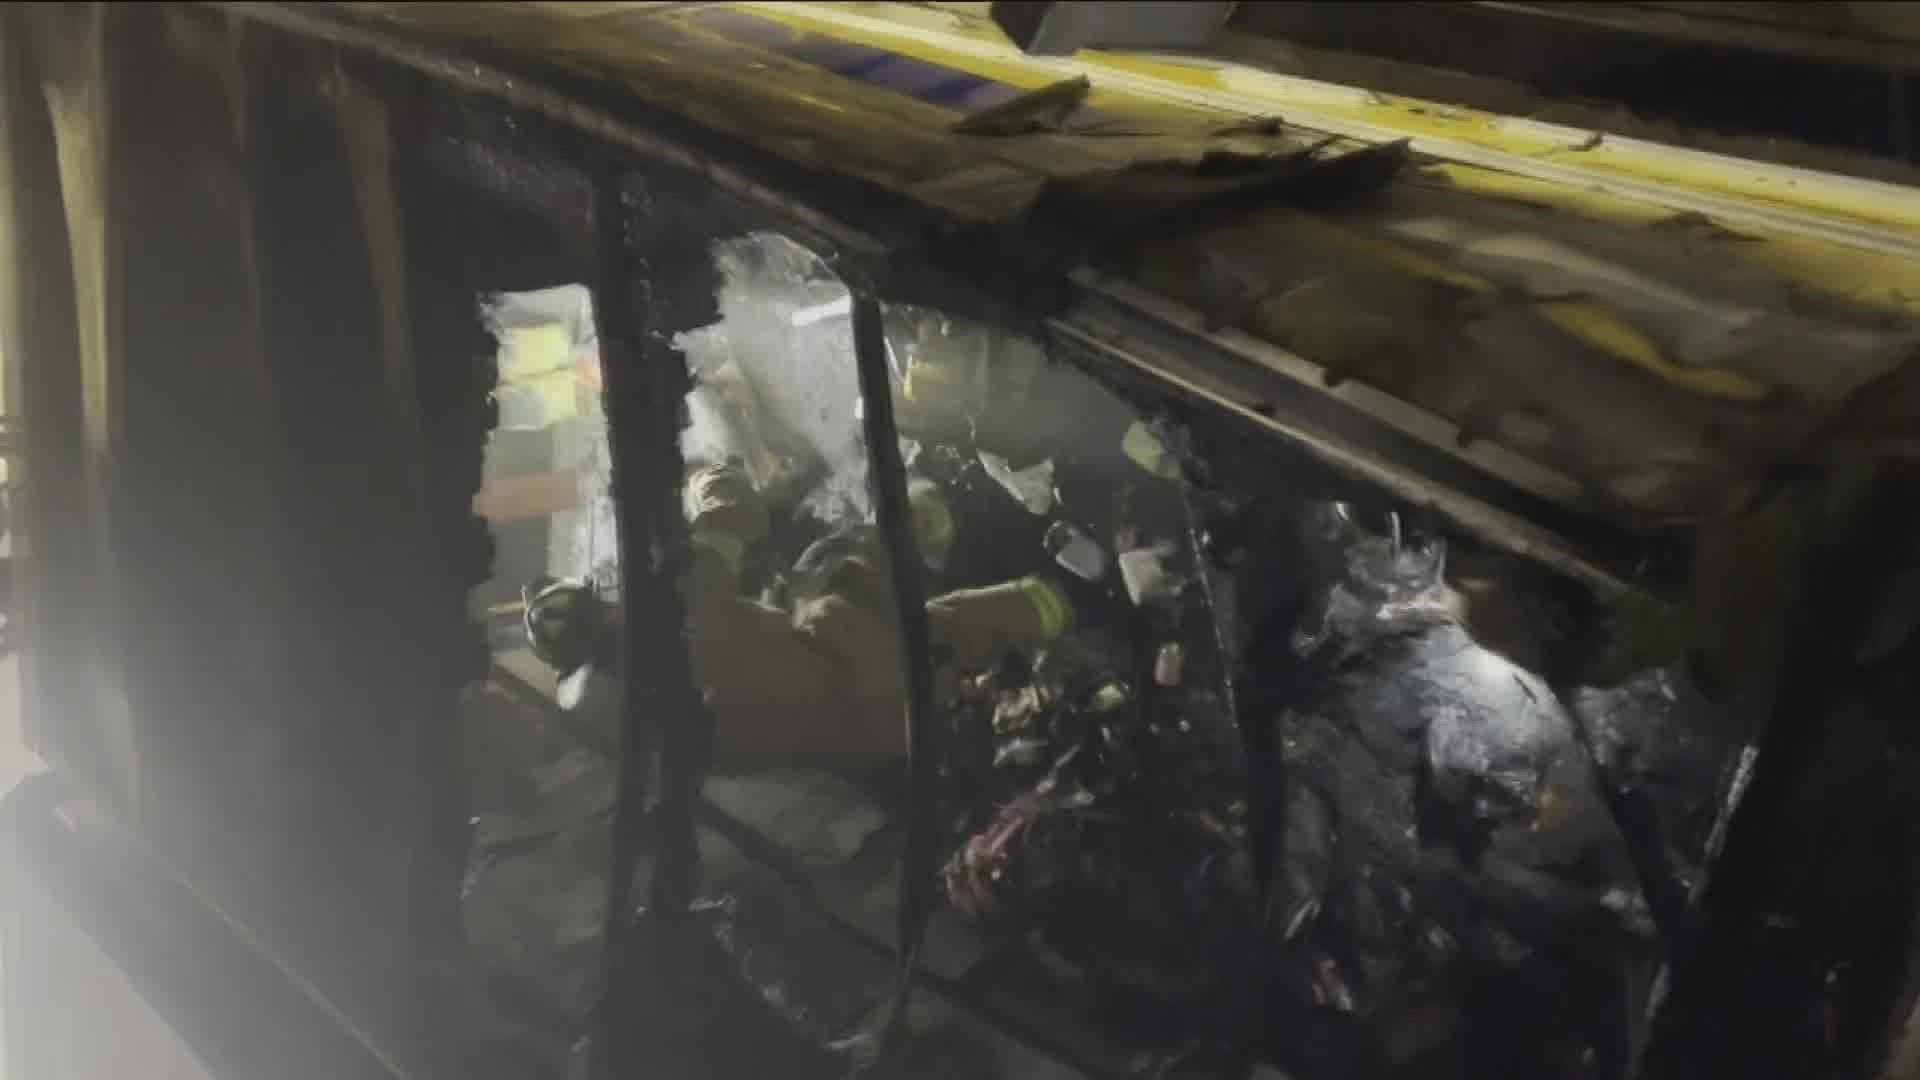 UPS confirmed Friday in a statement that the fire did in fact start inside one of their delivery vehicles, and that vehicle along with its 150 packages was lost.